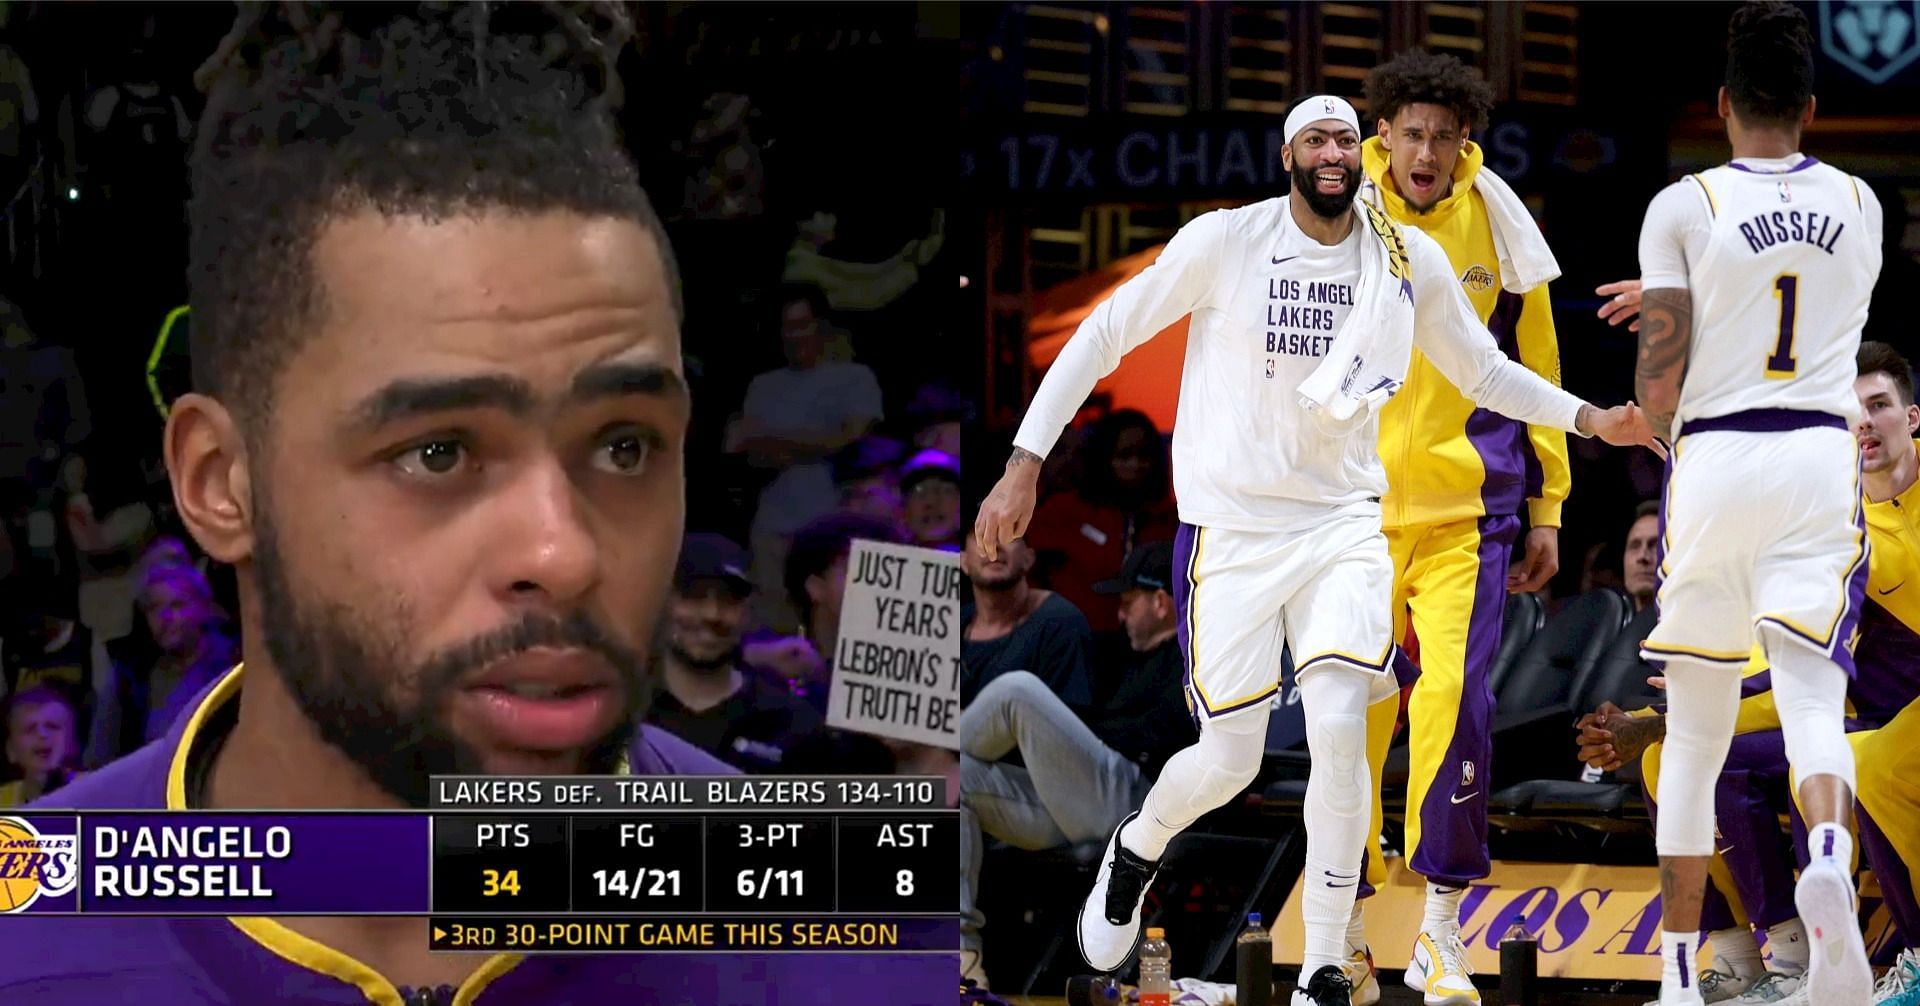 D&rsquo;Angelo Russell preaches avoiding media leaks amid various Lakers rumors